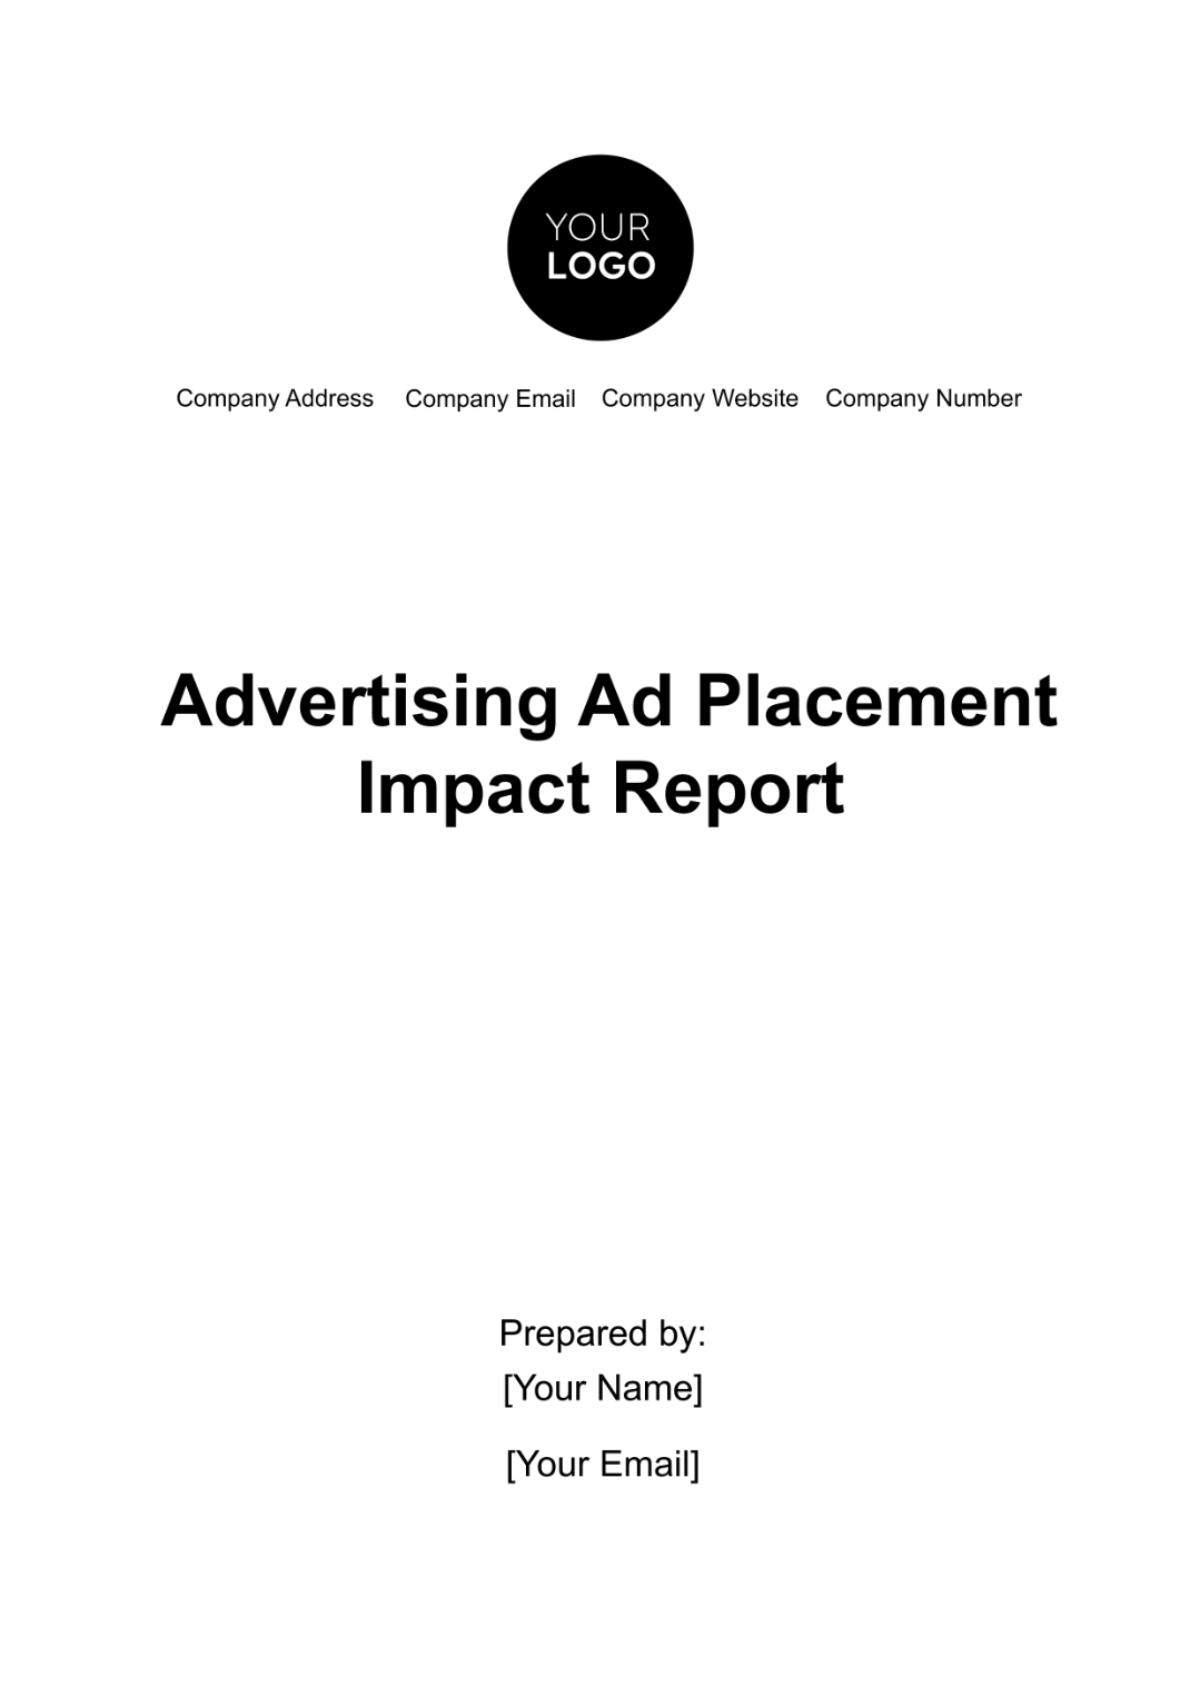 Advertising Ad Placement Impact Report Template